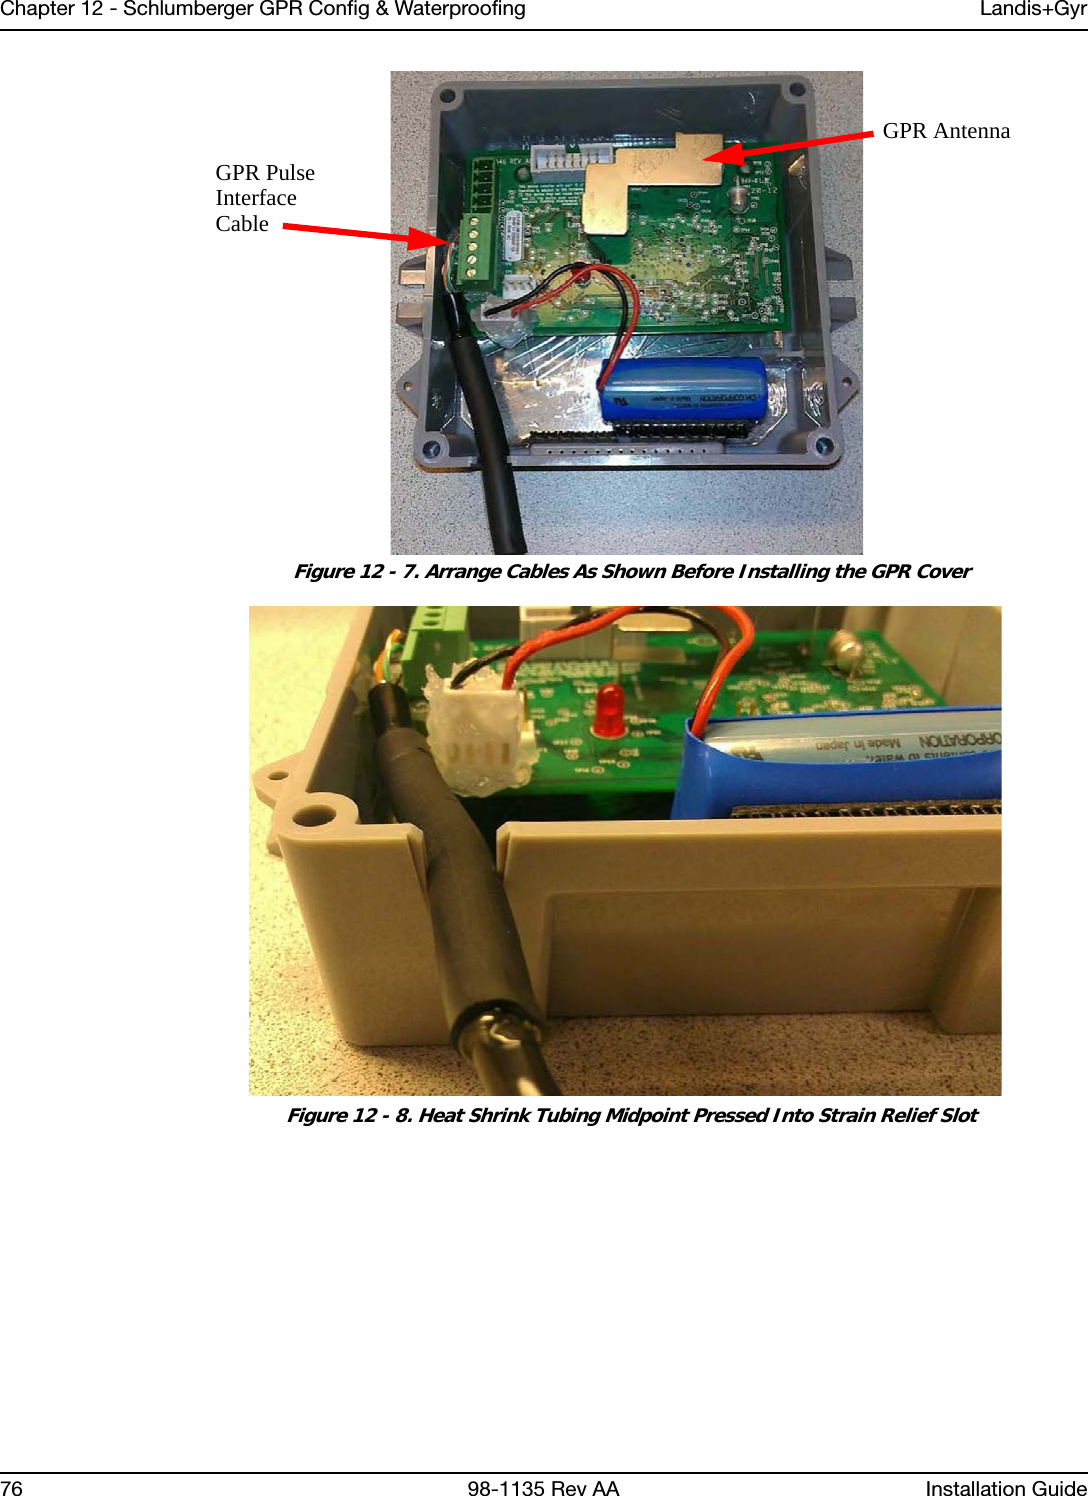 Chapter 12 - Schlumberger GPR Config &amp; Waterproofing Landis+Gyr76 98-1135 Rev AA Installation Guide Figure 12 - 7. Arrange Cables As Shown Before Installing the GPR Cover Figure 12 - 8. Heat Shrink Tubing Midpoint Pressed Into Strain Relief SlotGPR PulseInterfaceCableGPR Antenna